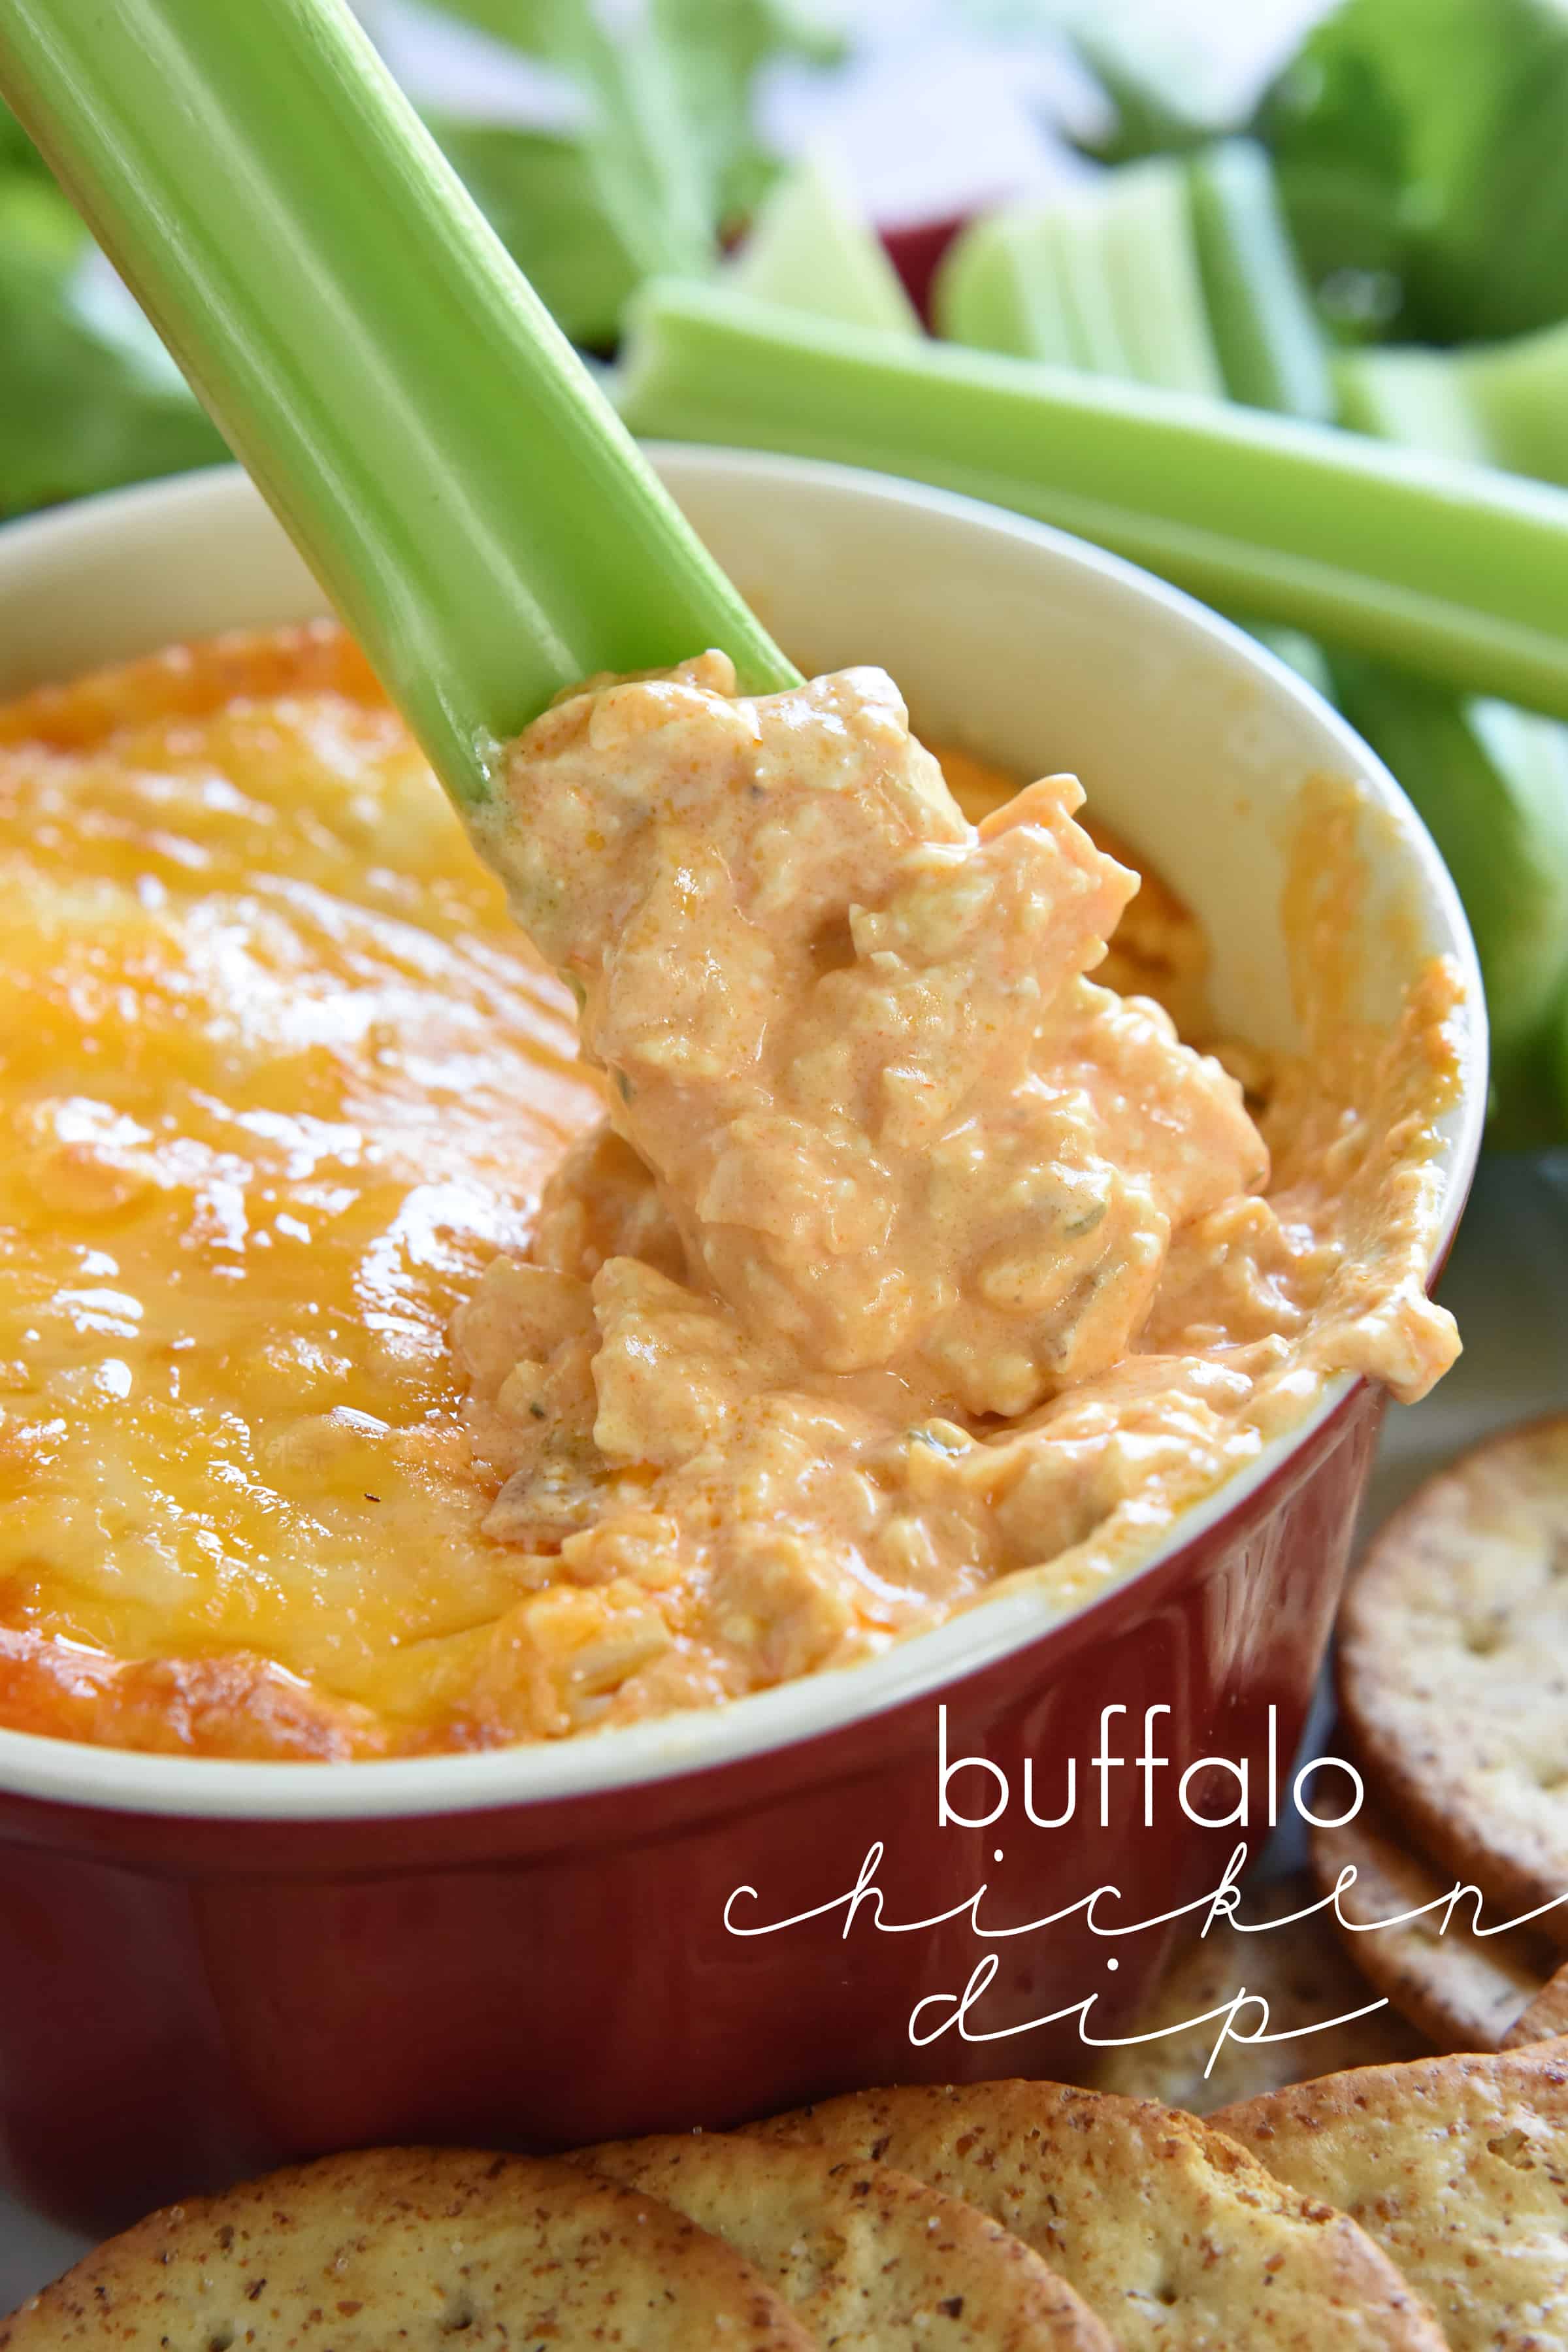 https://www.fivehearthome.com/wp-content/uploads/2015/09/Buffalo-Chicken-Dip-Recipe-Appetizer-by-Five-Heart-Home_700pxTitle.jpg